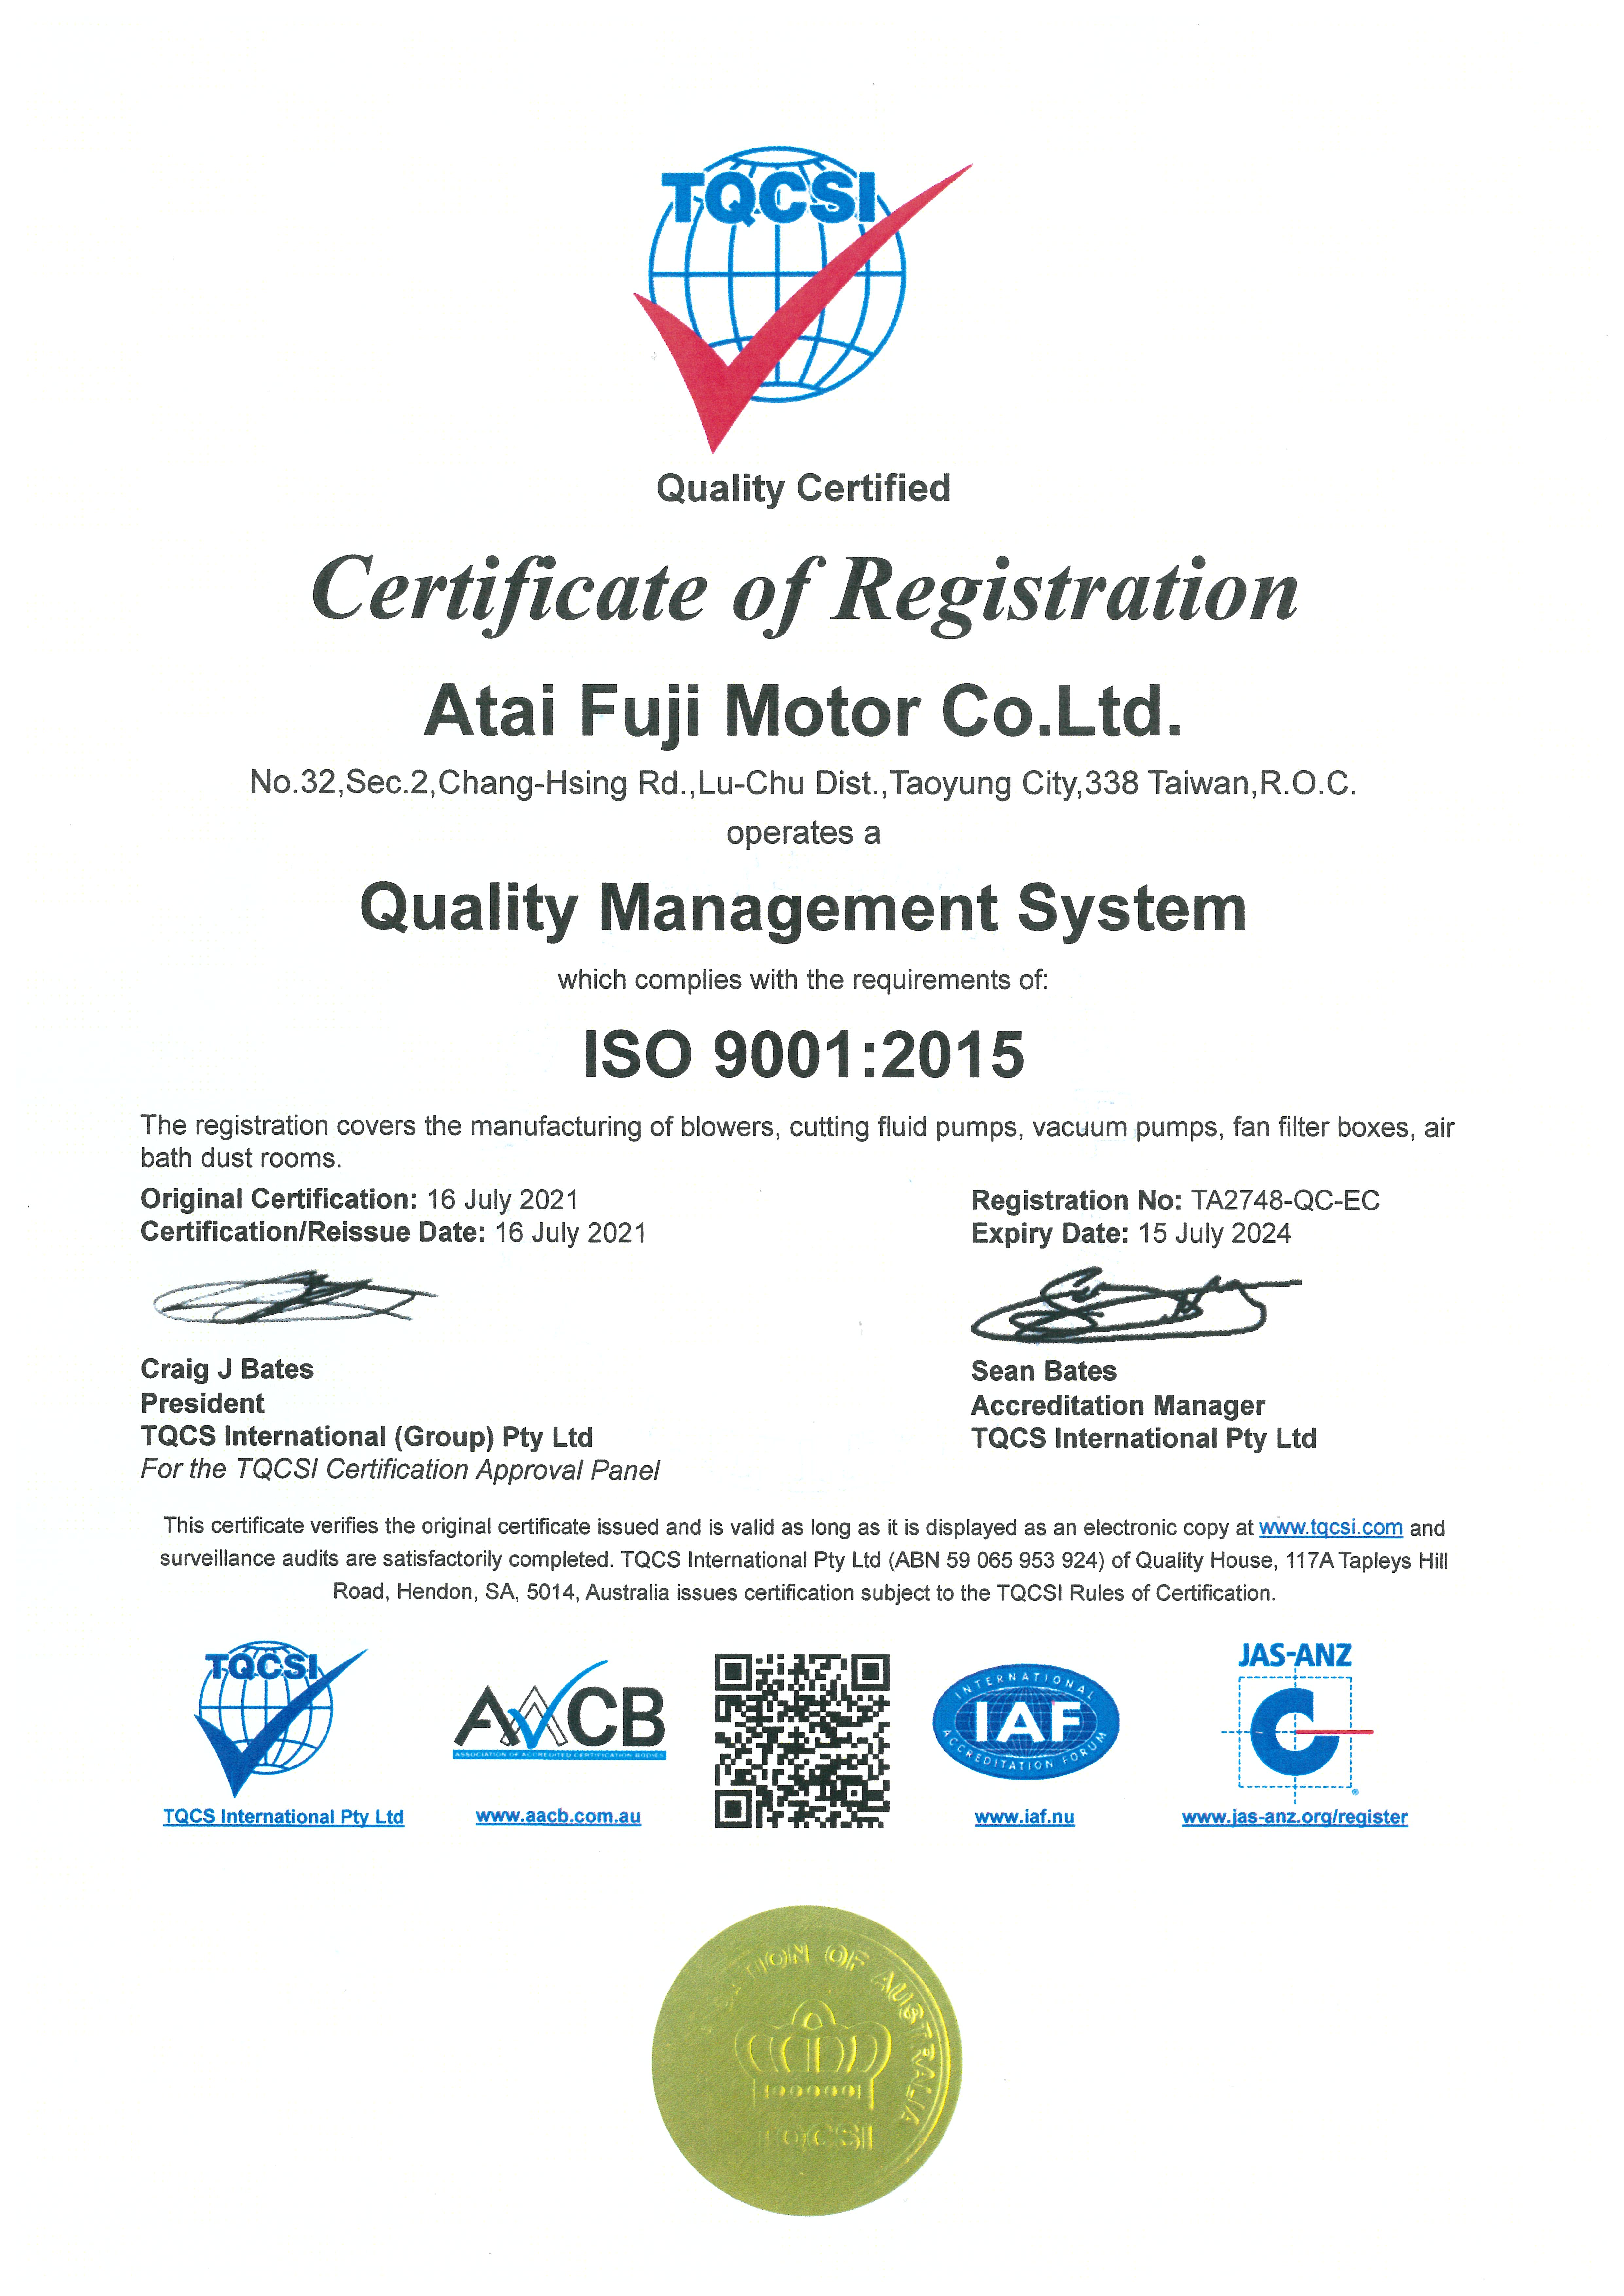 ISO 9001_2015品质管理系统(Quality Management Systems)